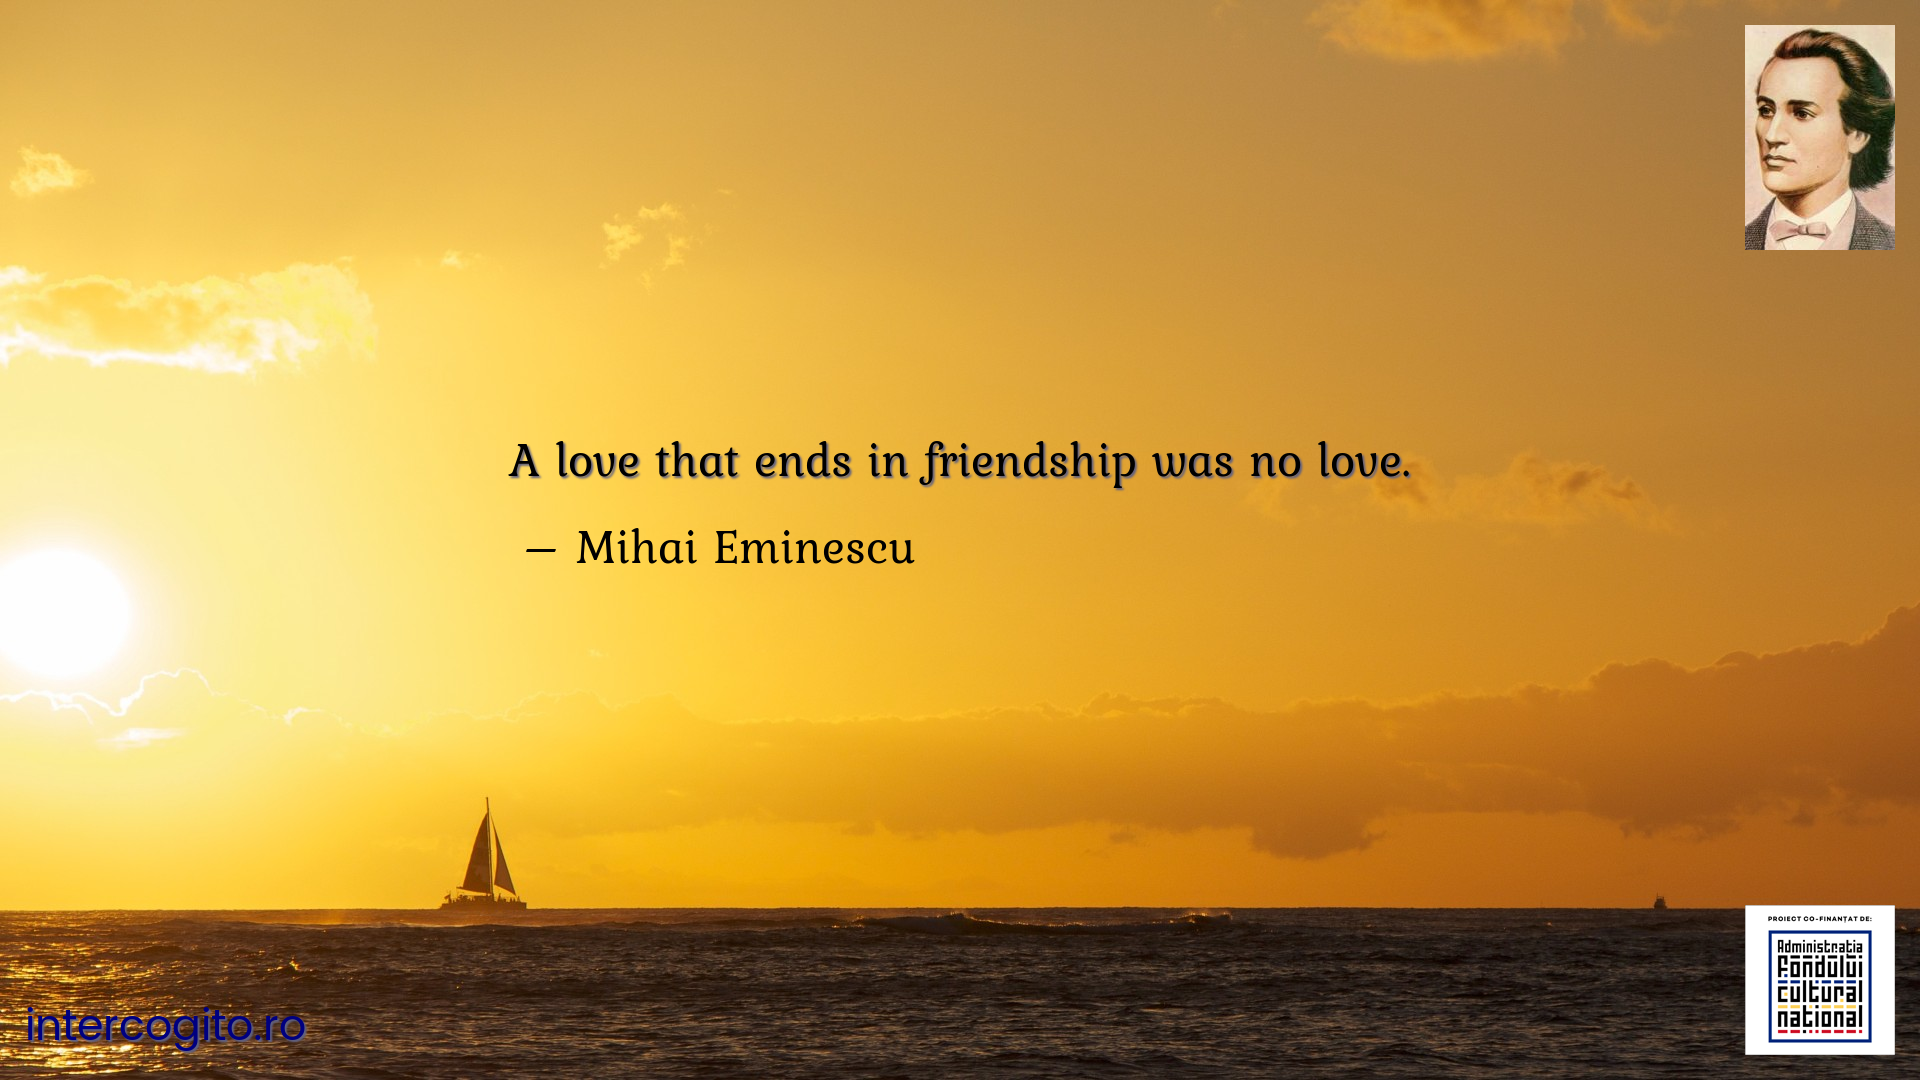 A love that ends in friendship was no love.